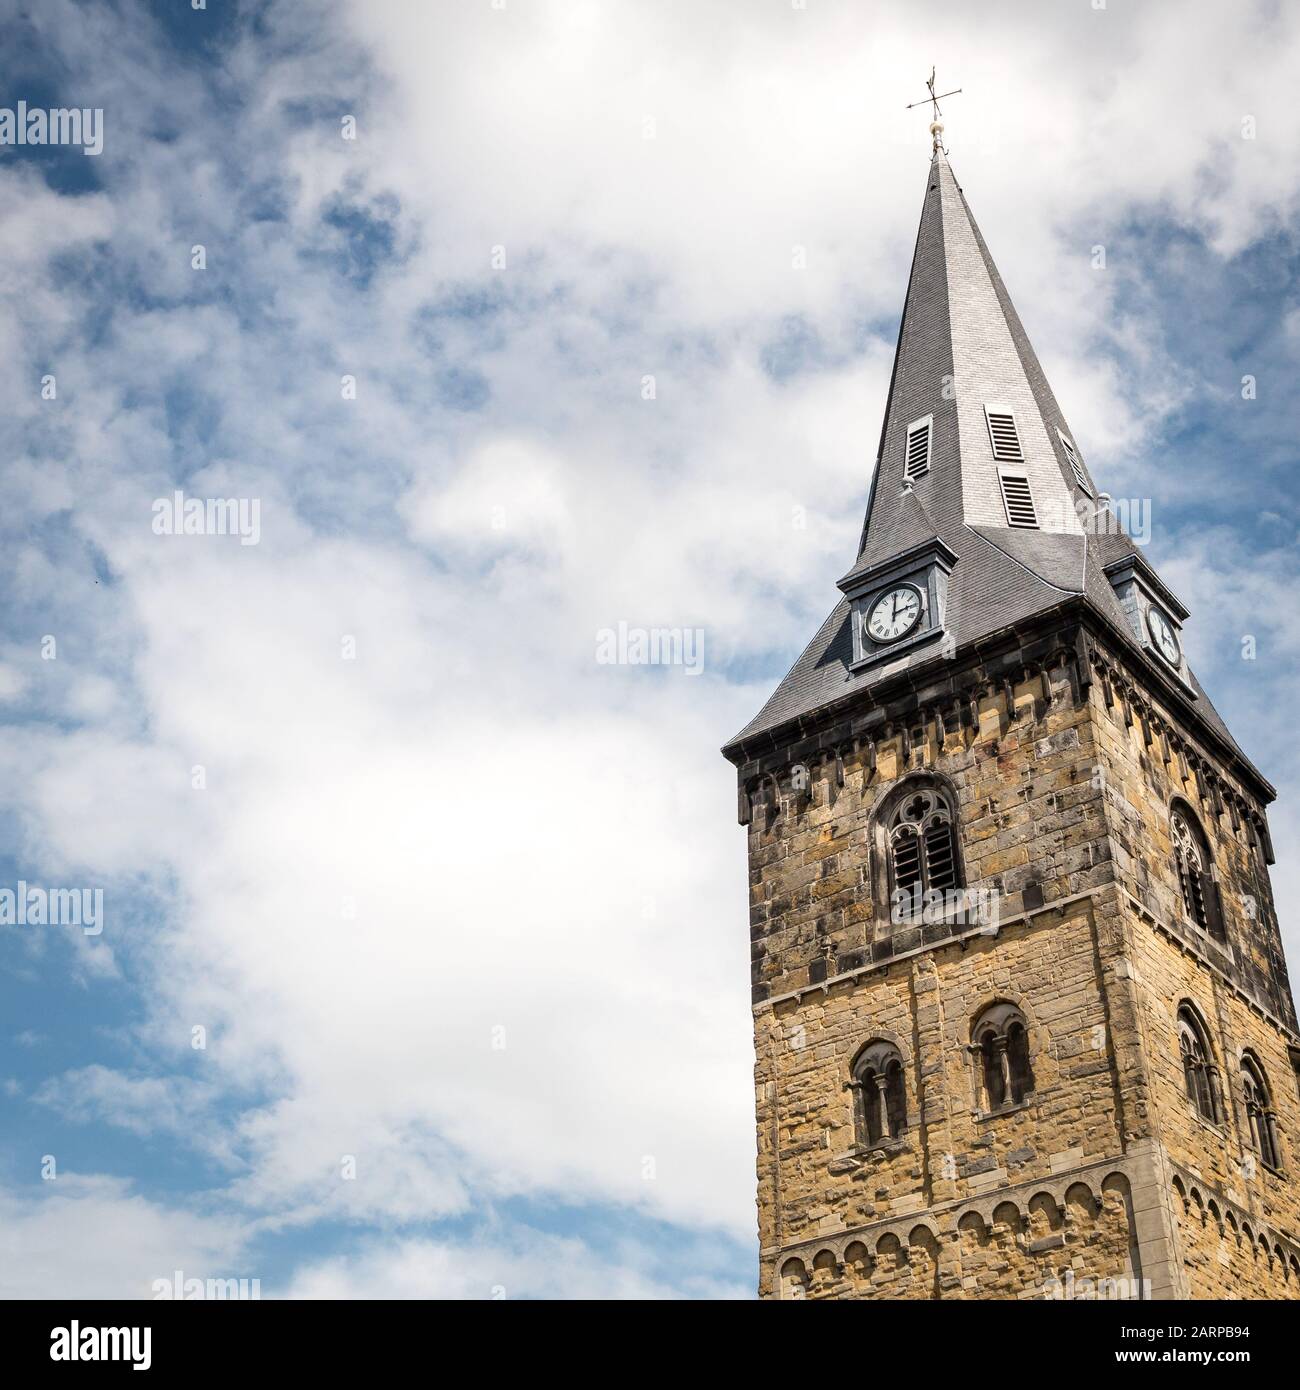 Low angle view looking up at the clock tower of the Grote Kerk (Great Church) in the Oude Markt (Old Market) of the Dutch city of Enschede. Stock Photo